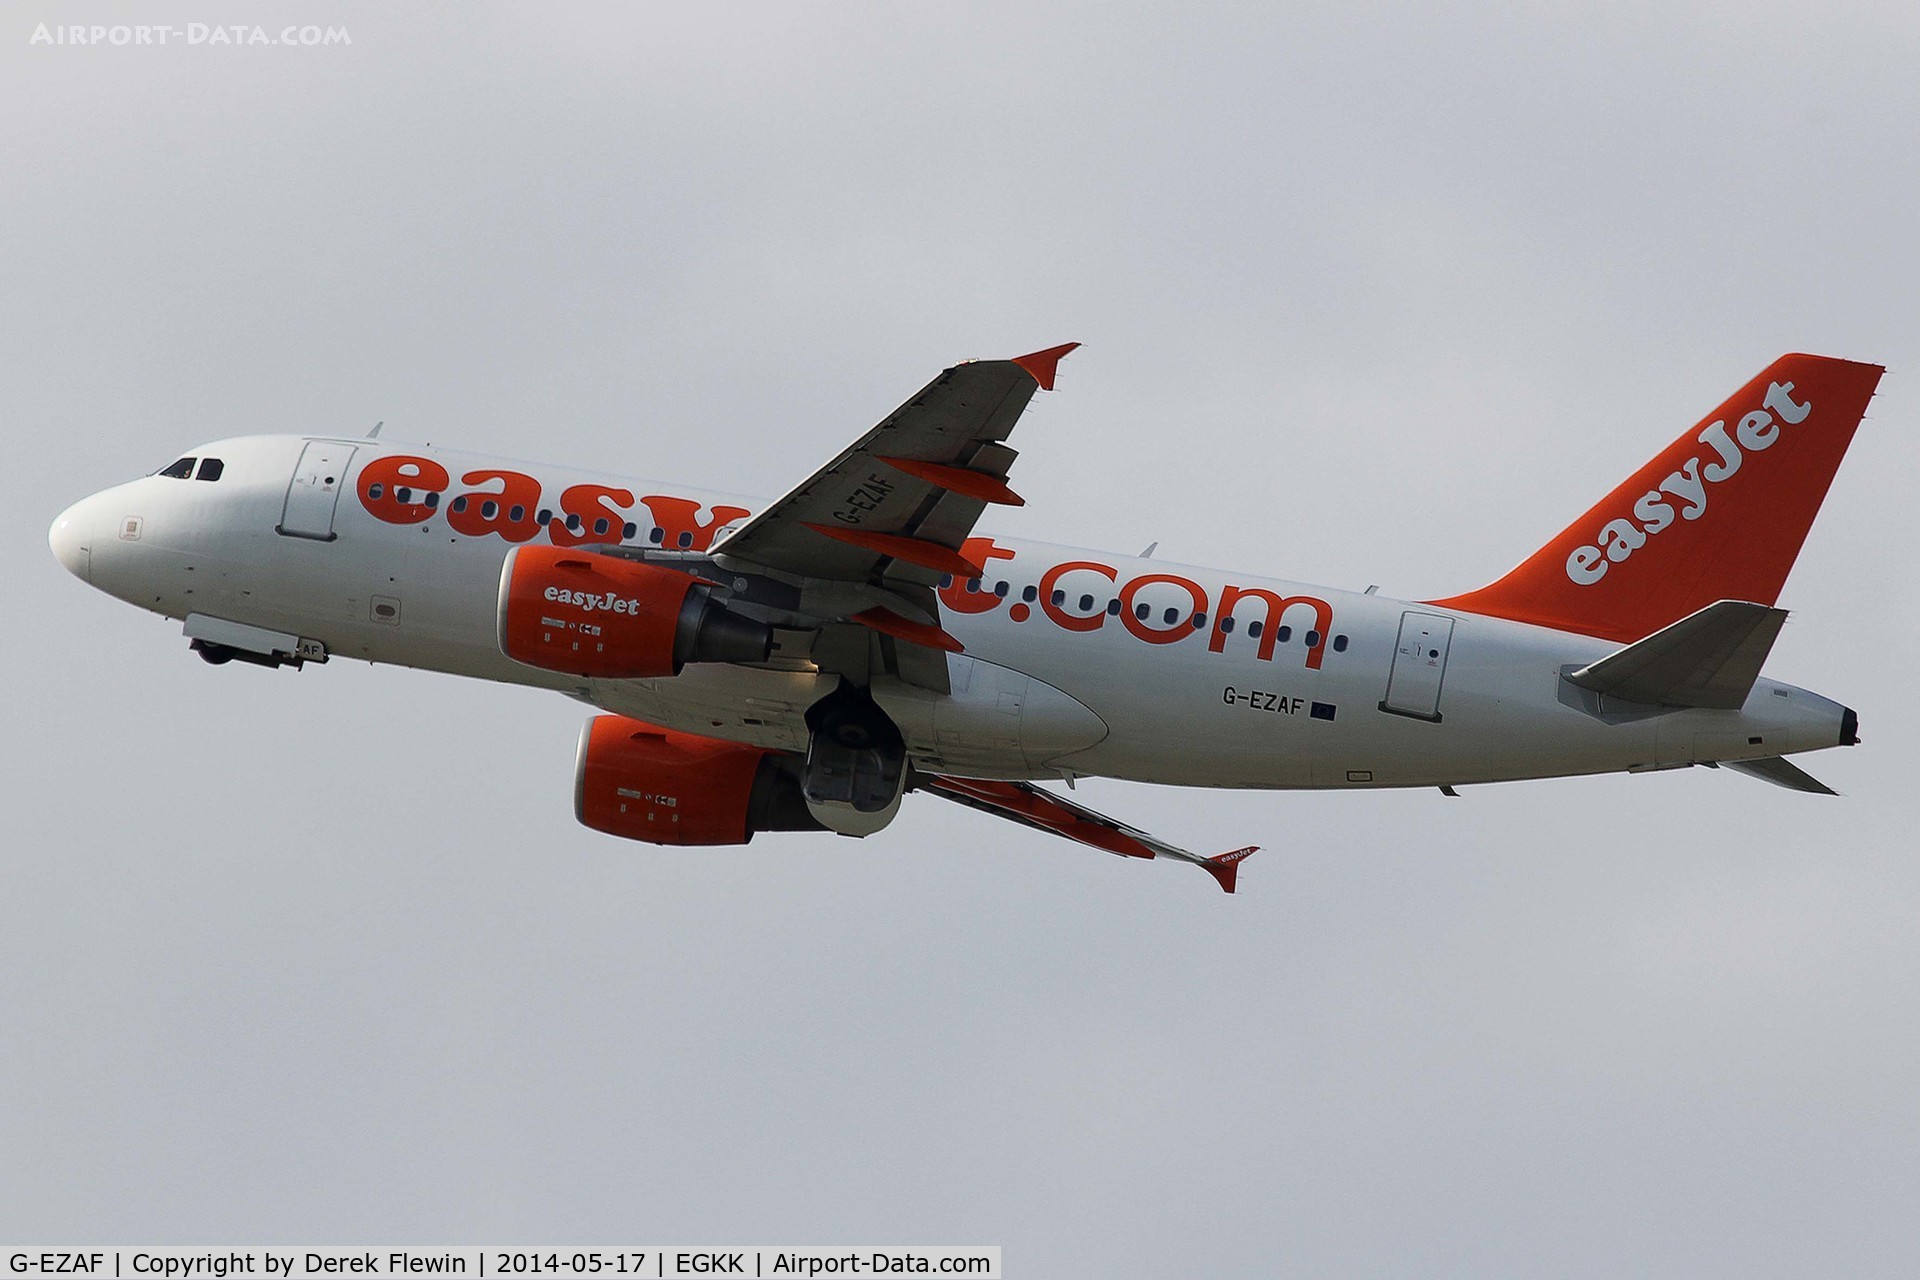 G-EZAF, 2006 Airbus A319-111 C/N 2715, Seen pulling out from runway 26R at EGKK.